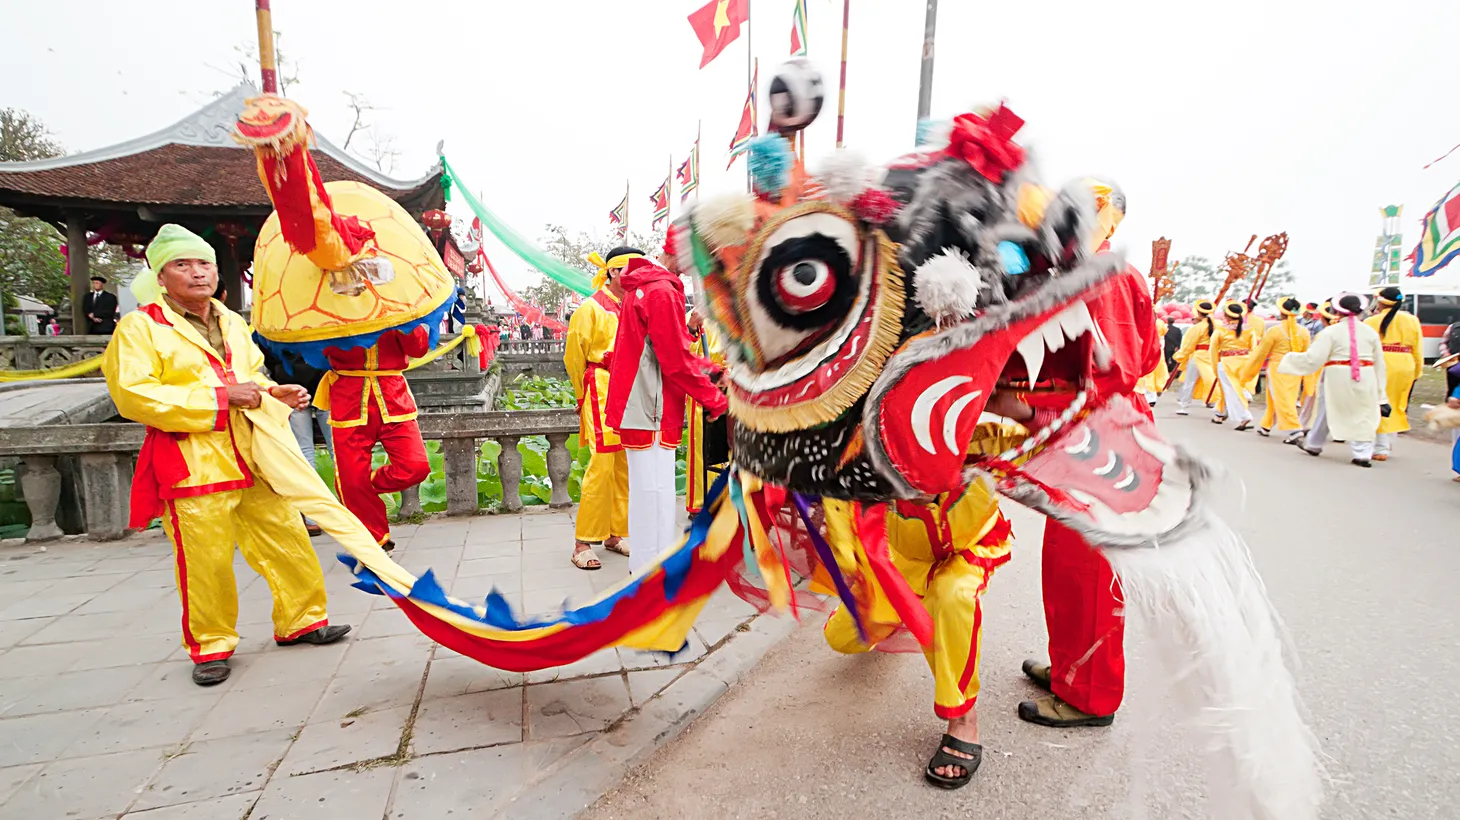 People of Vietnamese descent often welcome the Lunar New Year with firecrackers, music, and dance performances.